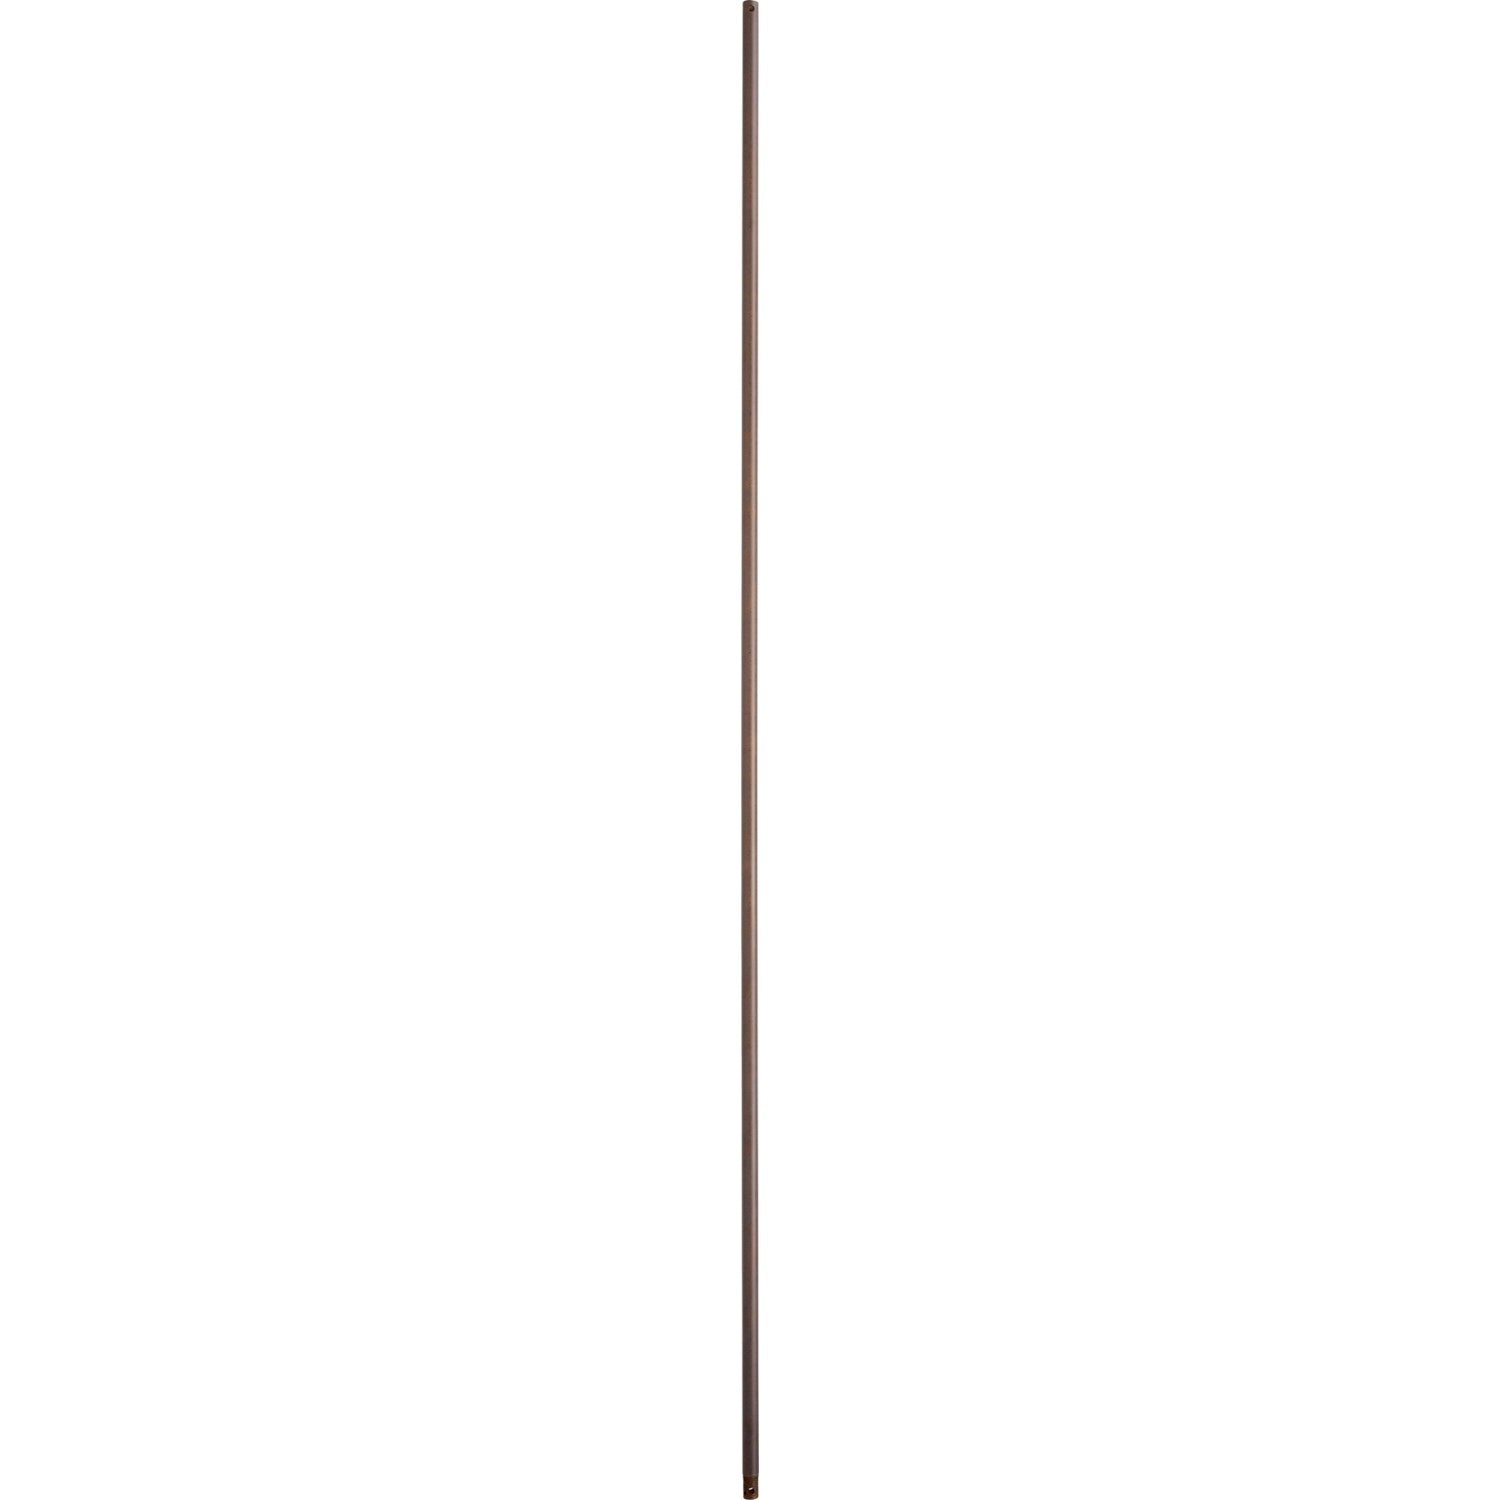 Quorum - 6-7286 - 72" Universal Downrod - 72 in. Downrods - Oiled Bronze